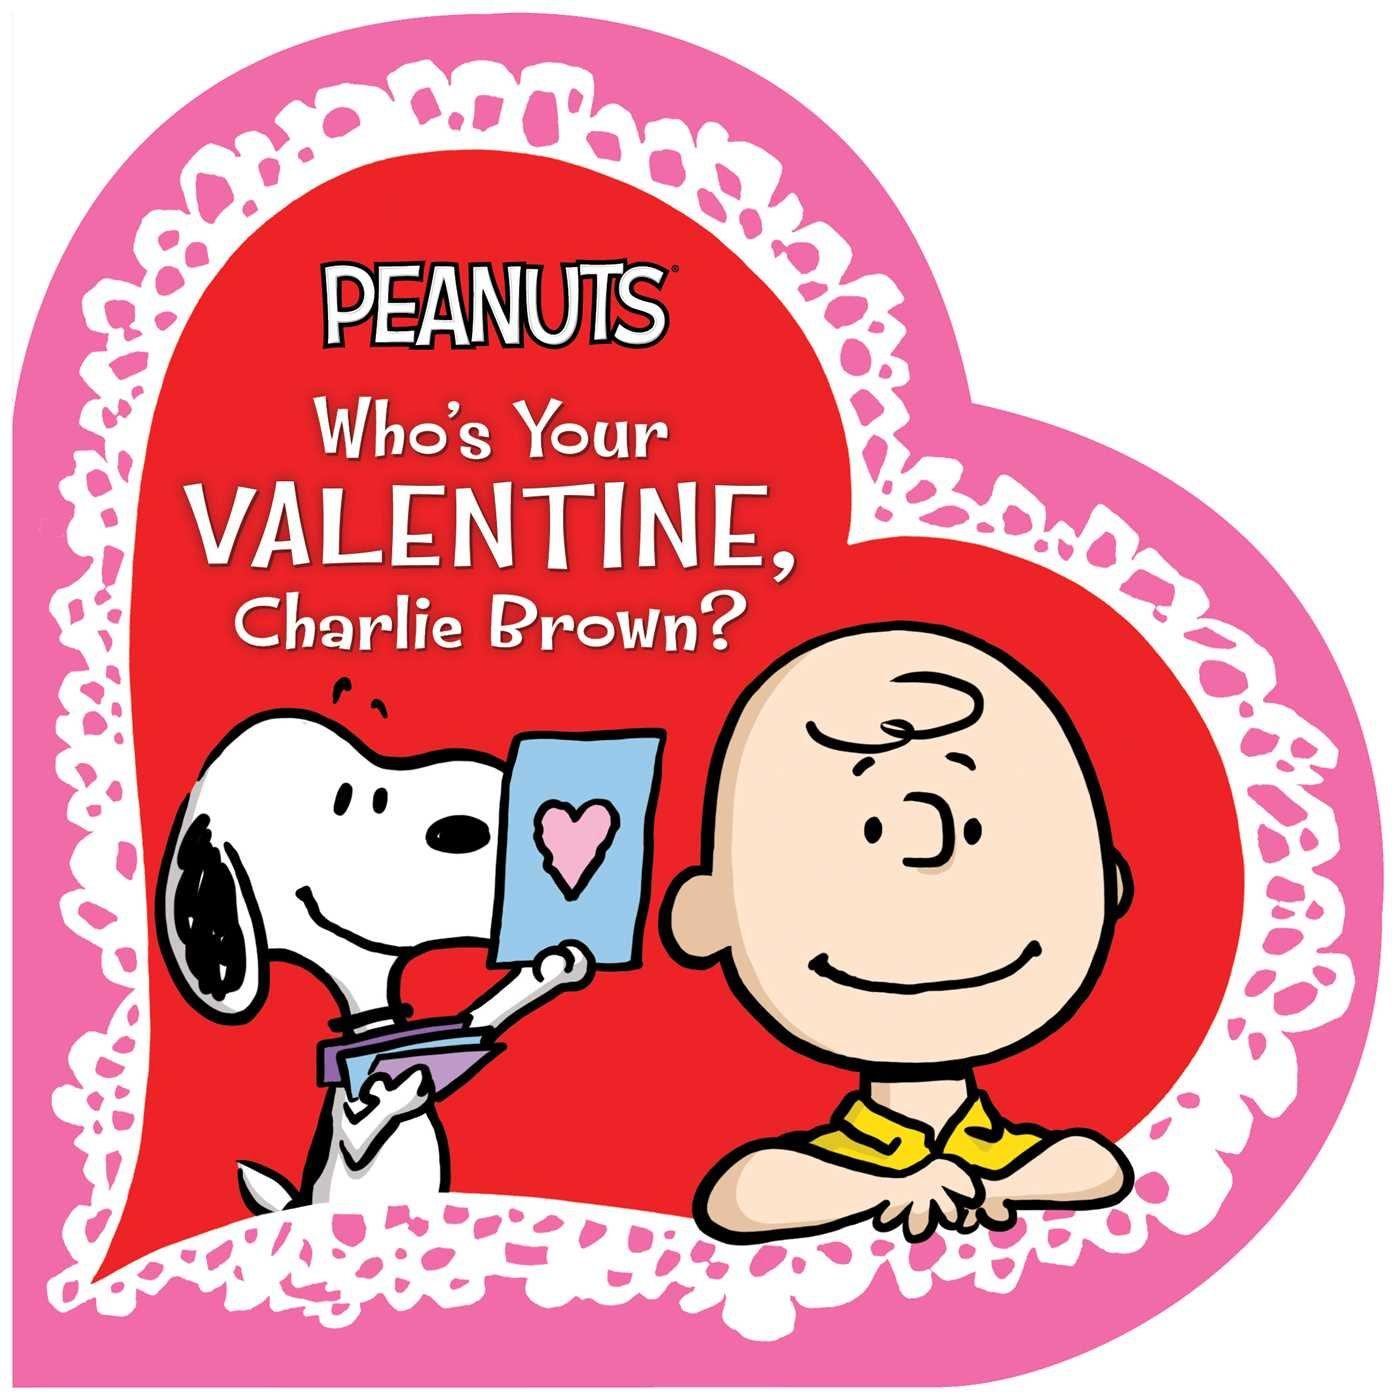 Whos Your Valetine Charlie Brown Book for $2.84